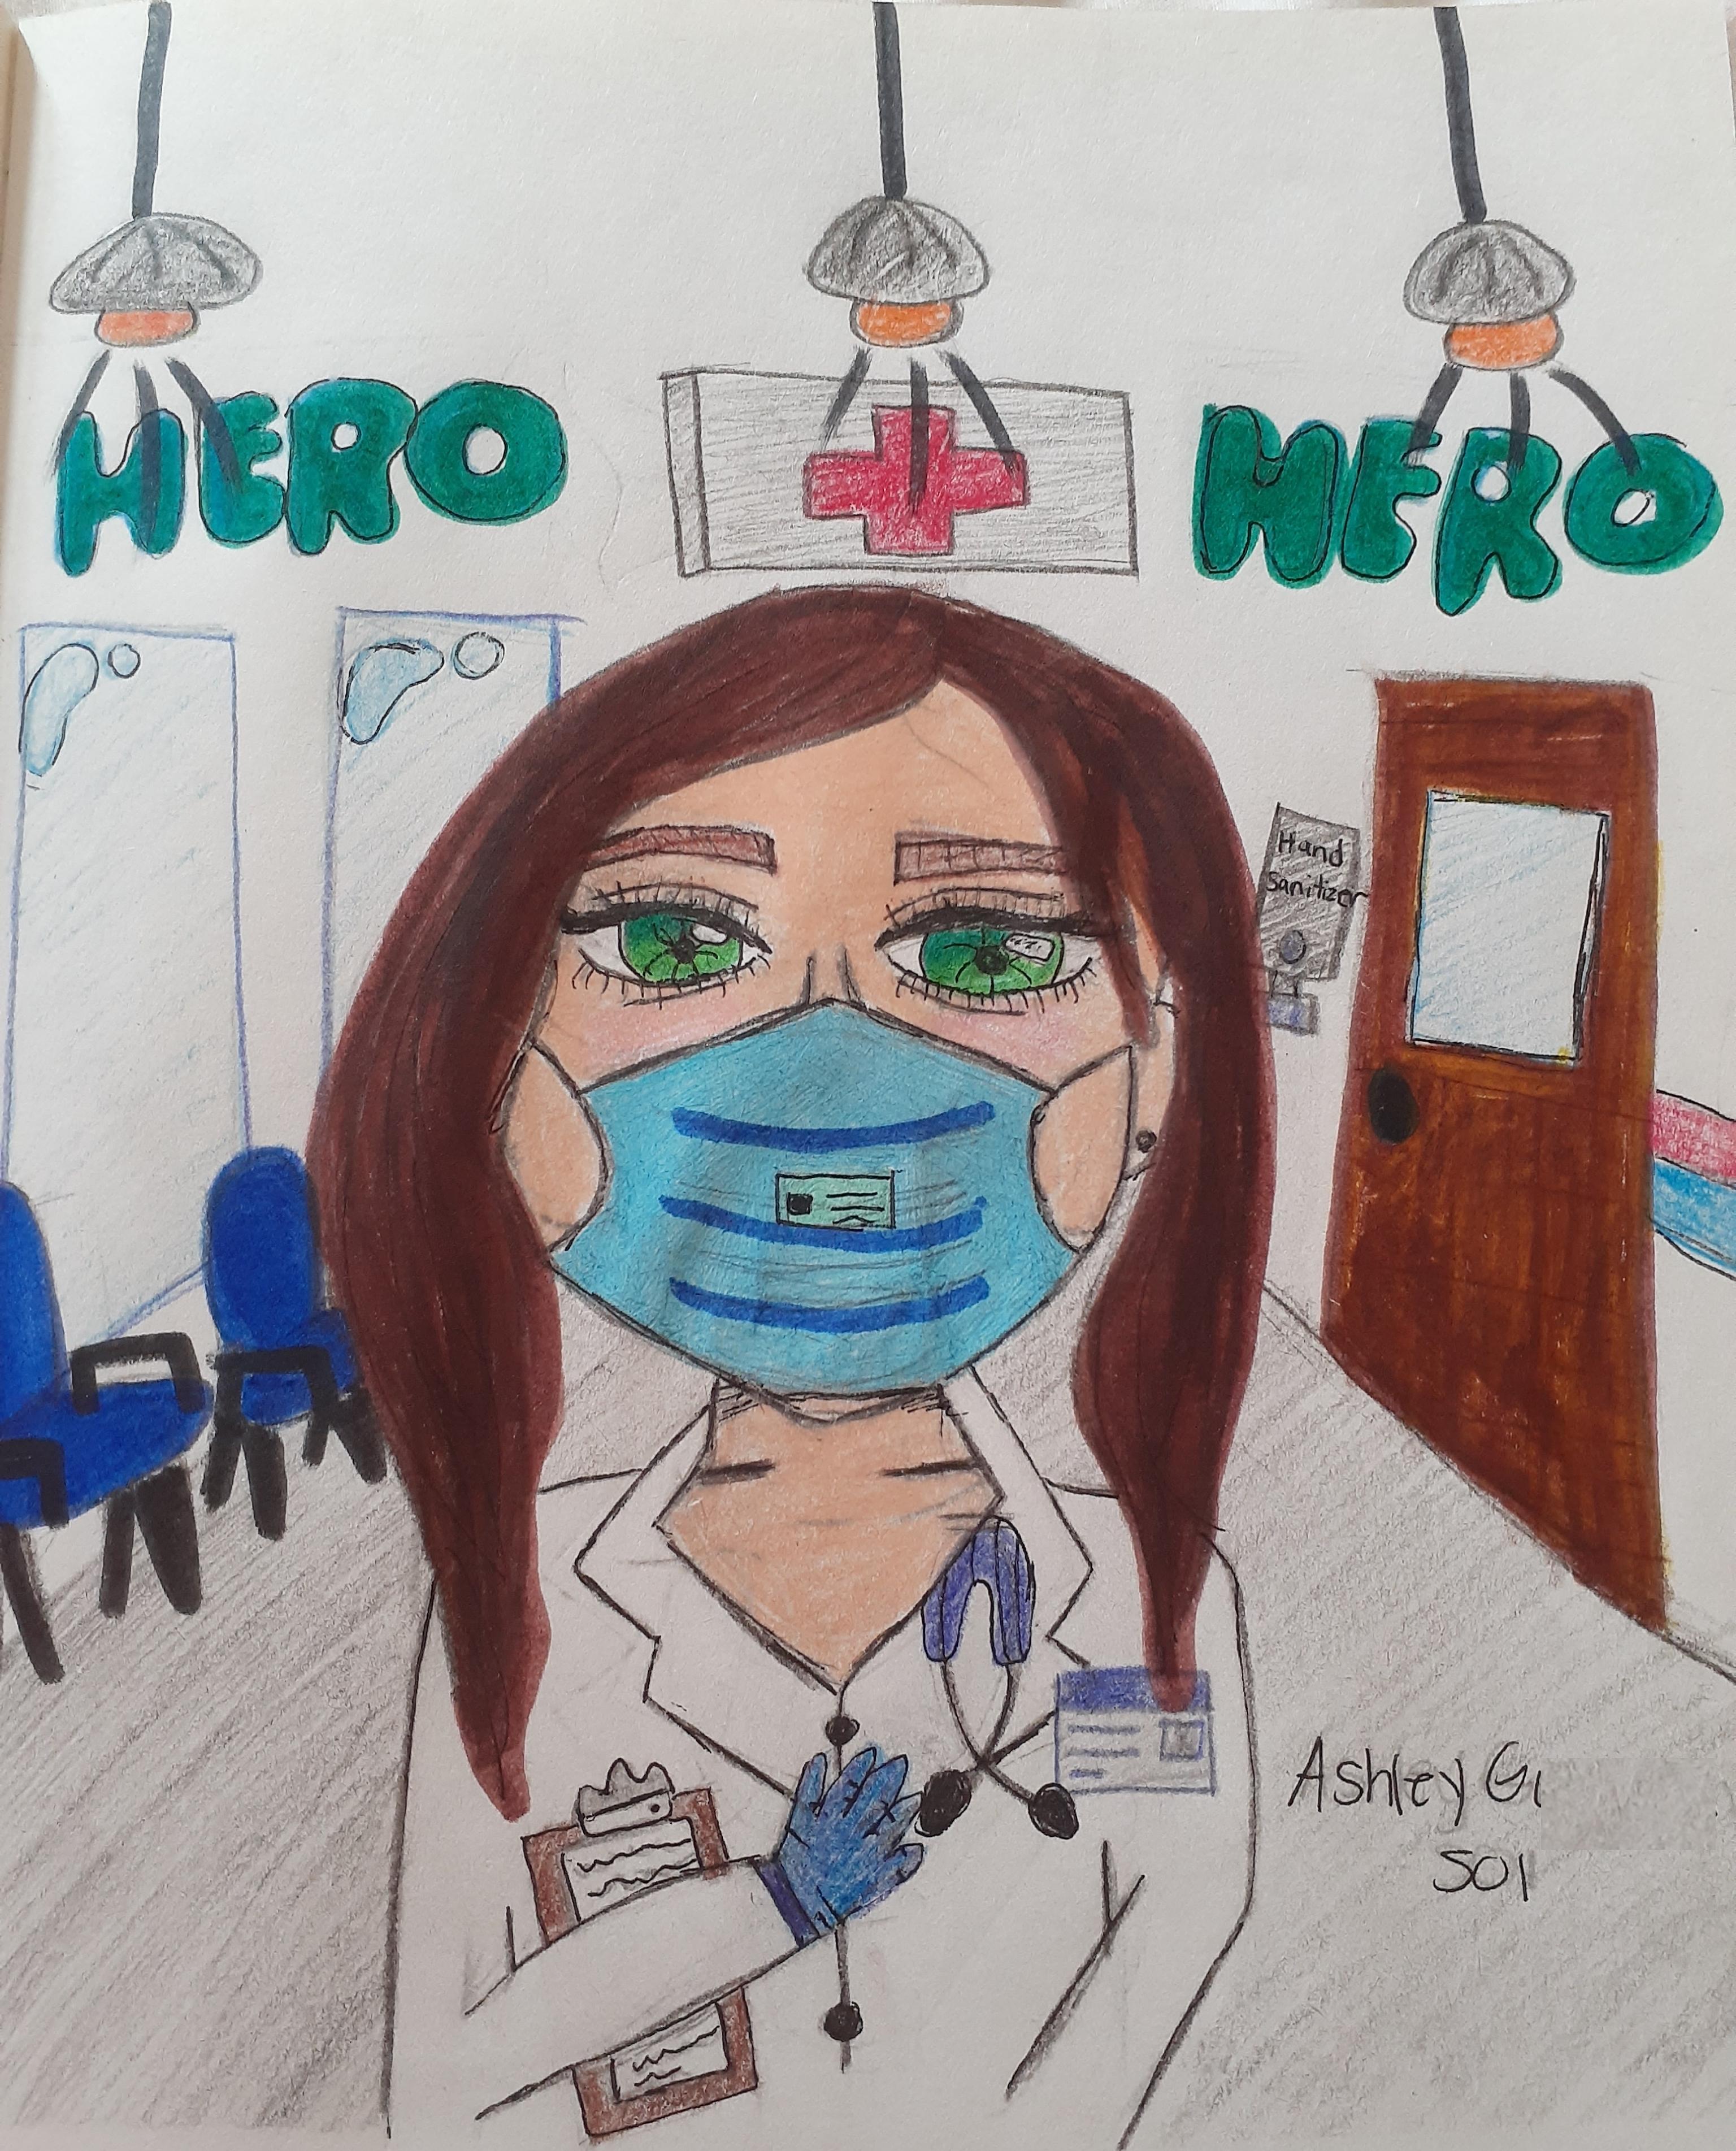 Nurses are Heroes by Asley